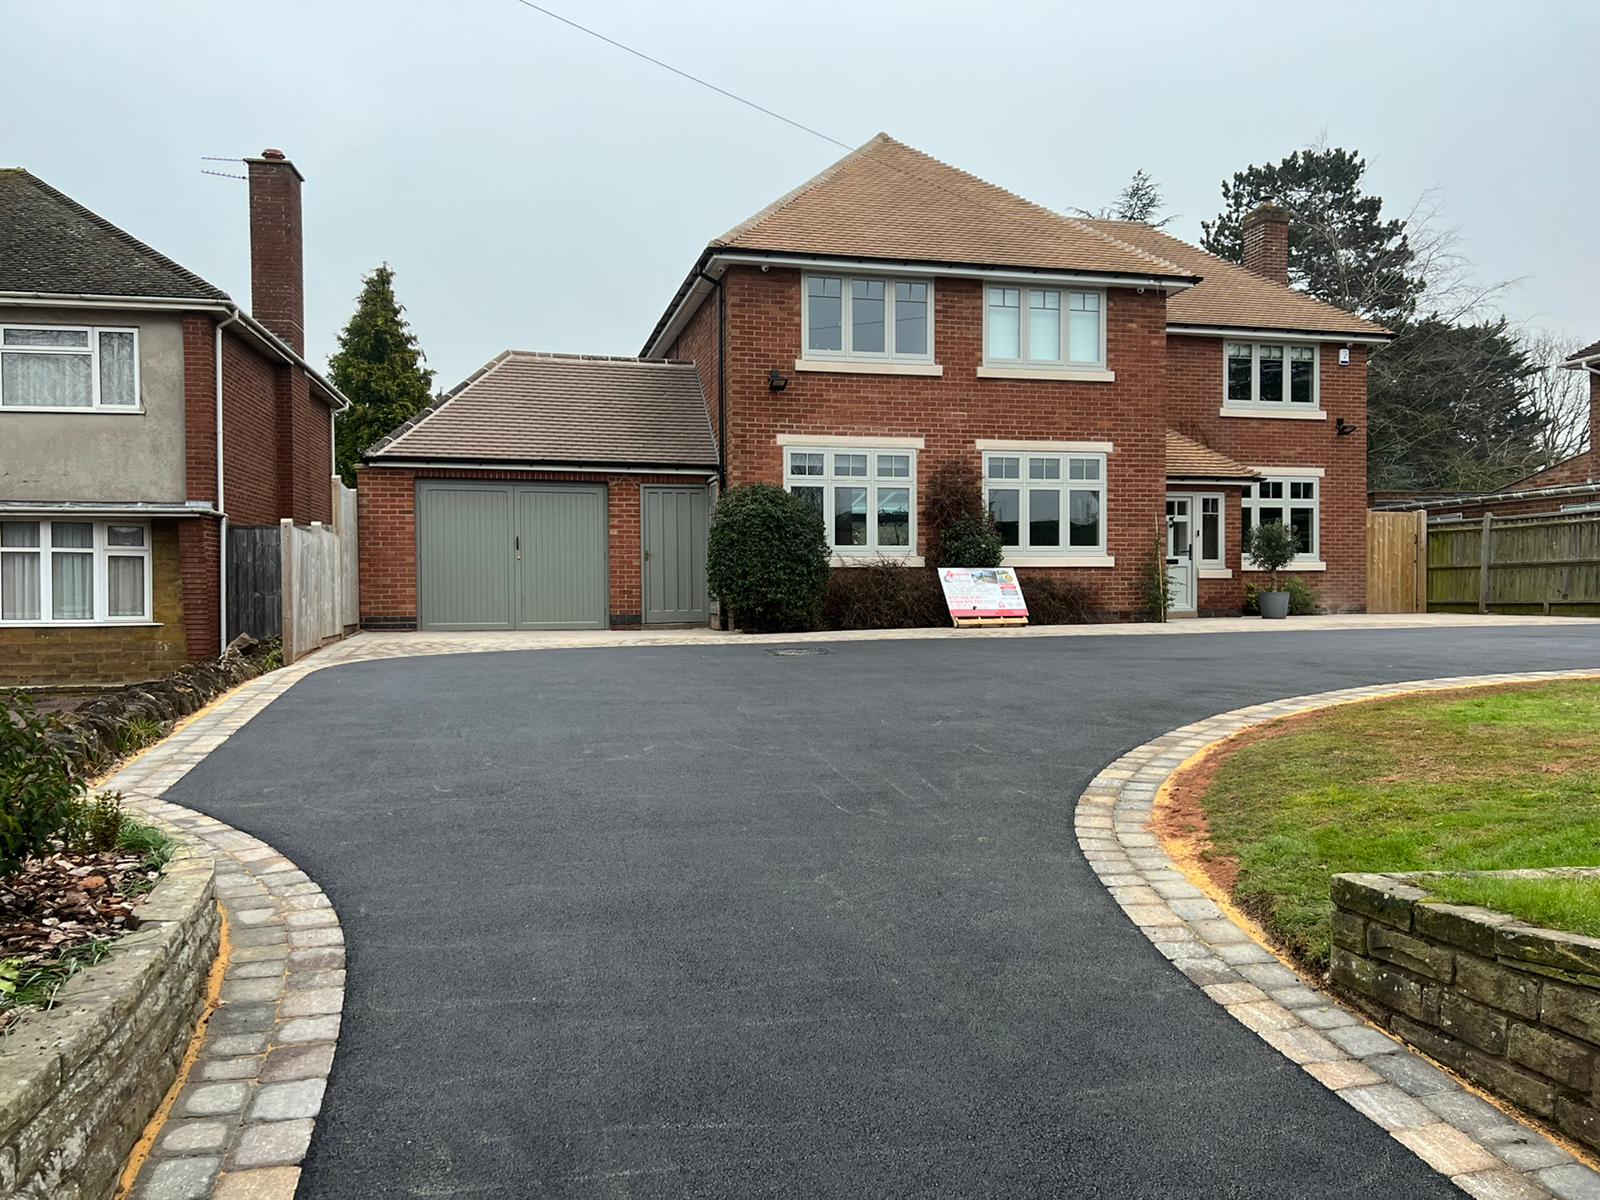 Is a Concrete Driveway the Best Choice for Your Home